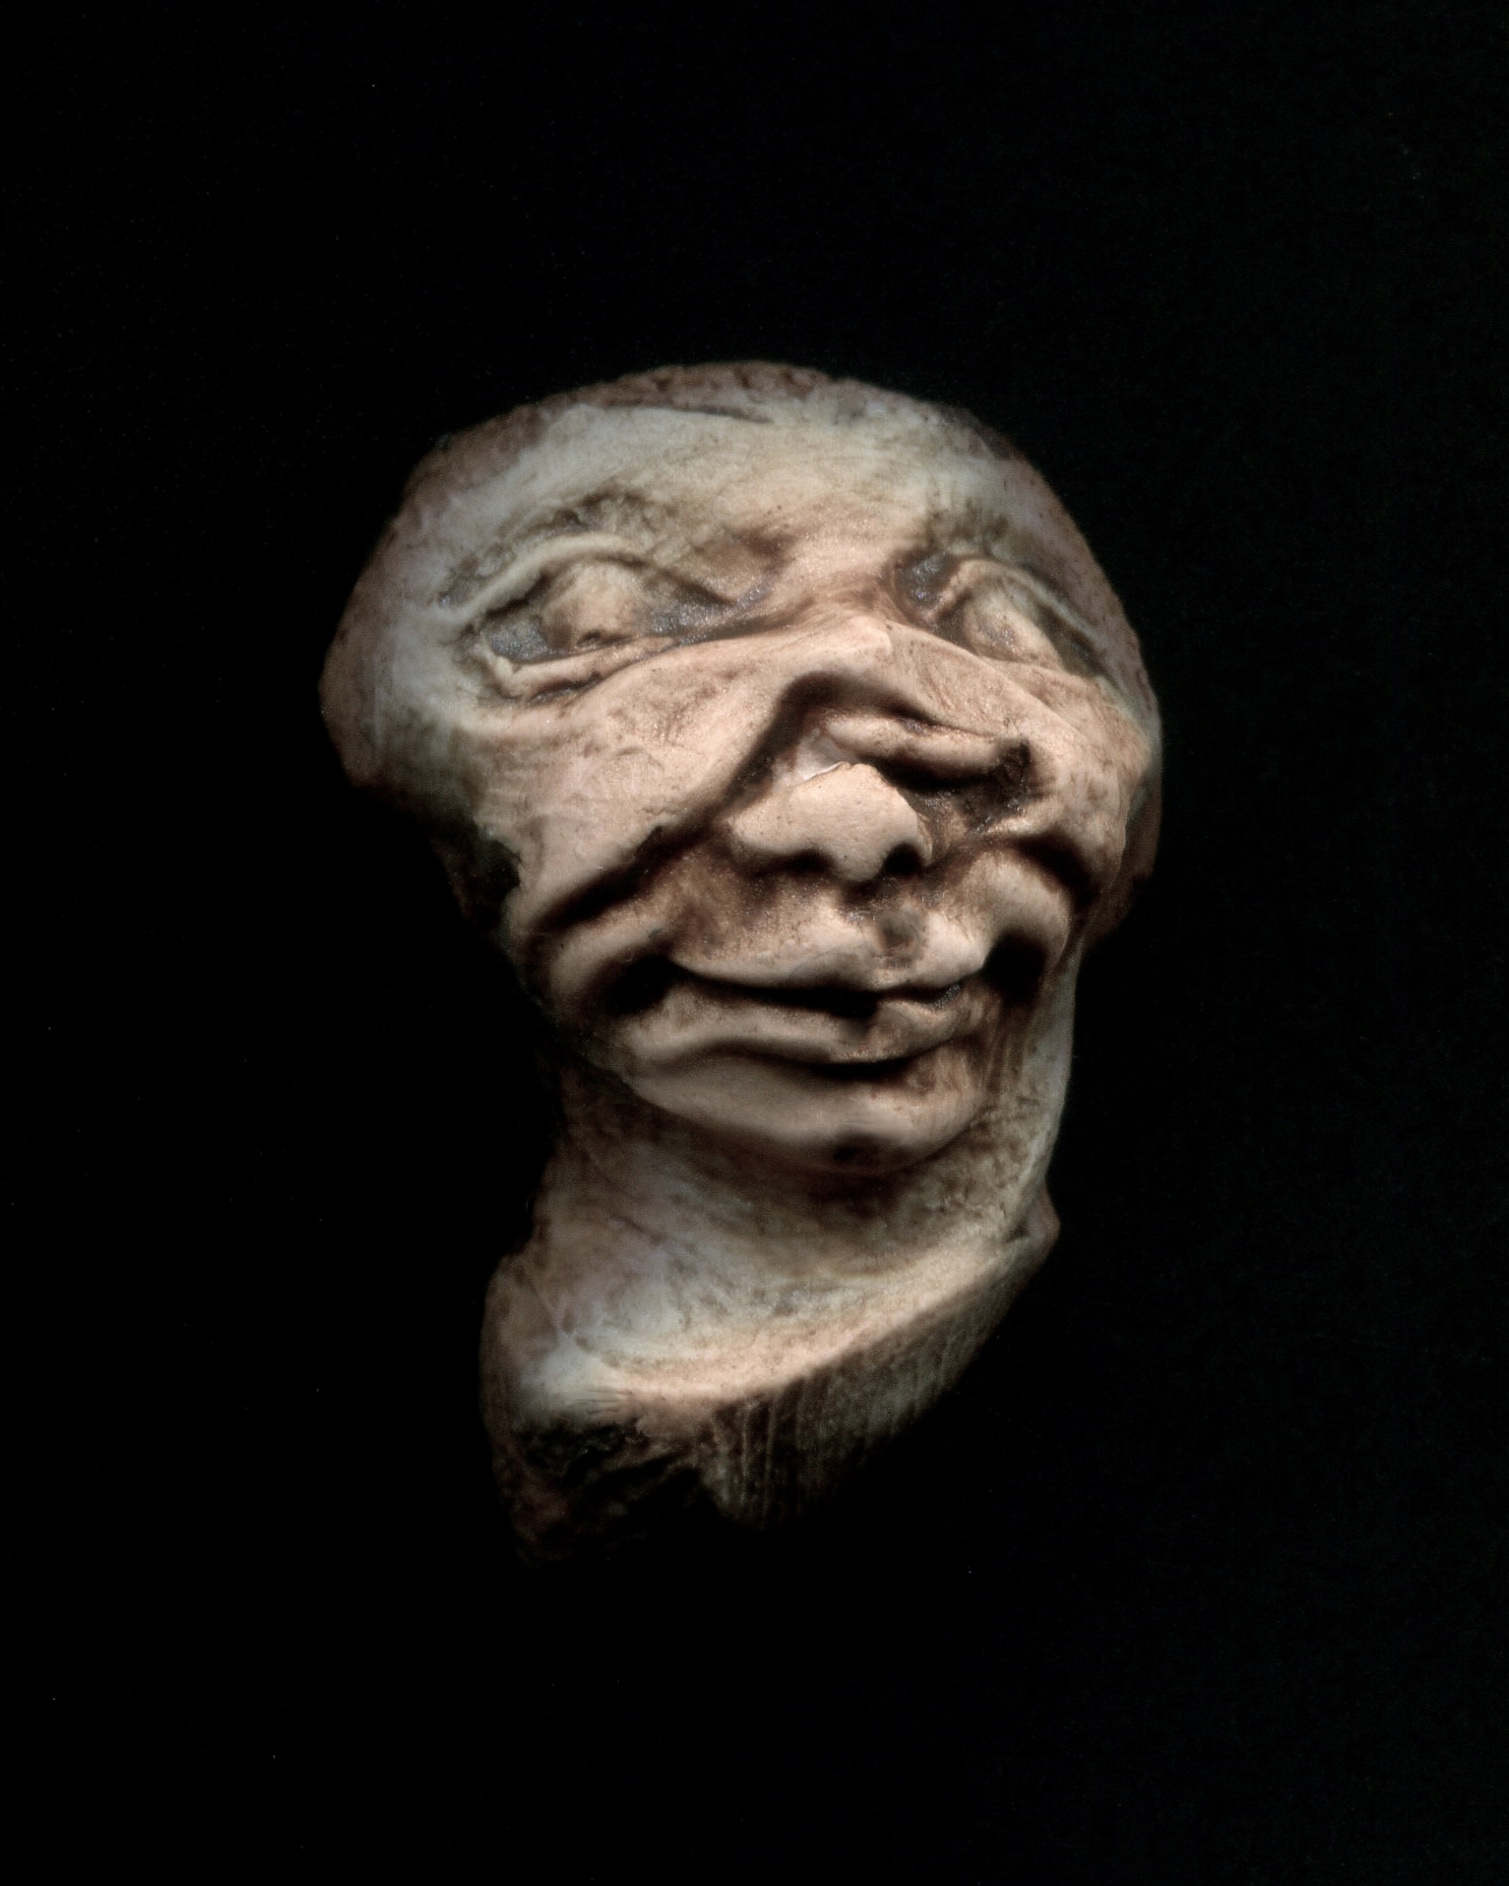 a carved statue of a creepy face on a black background